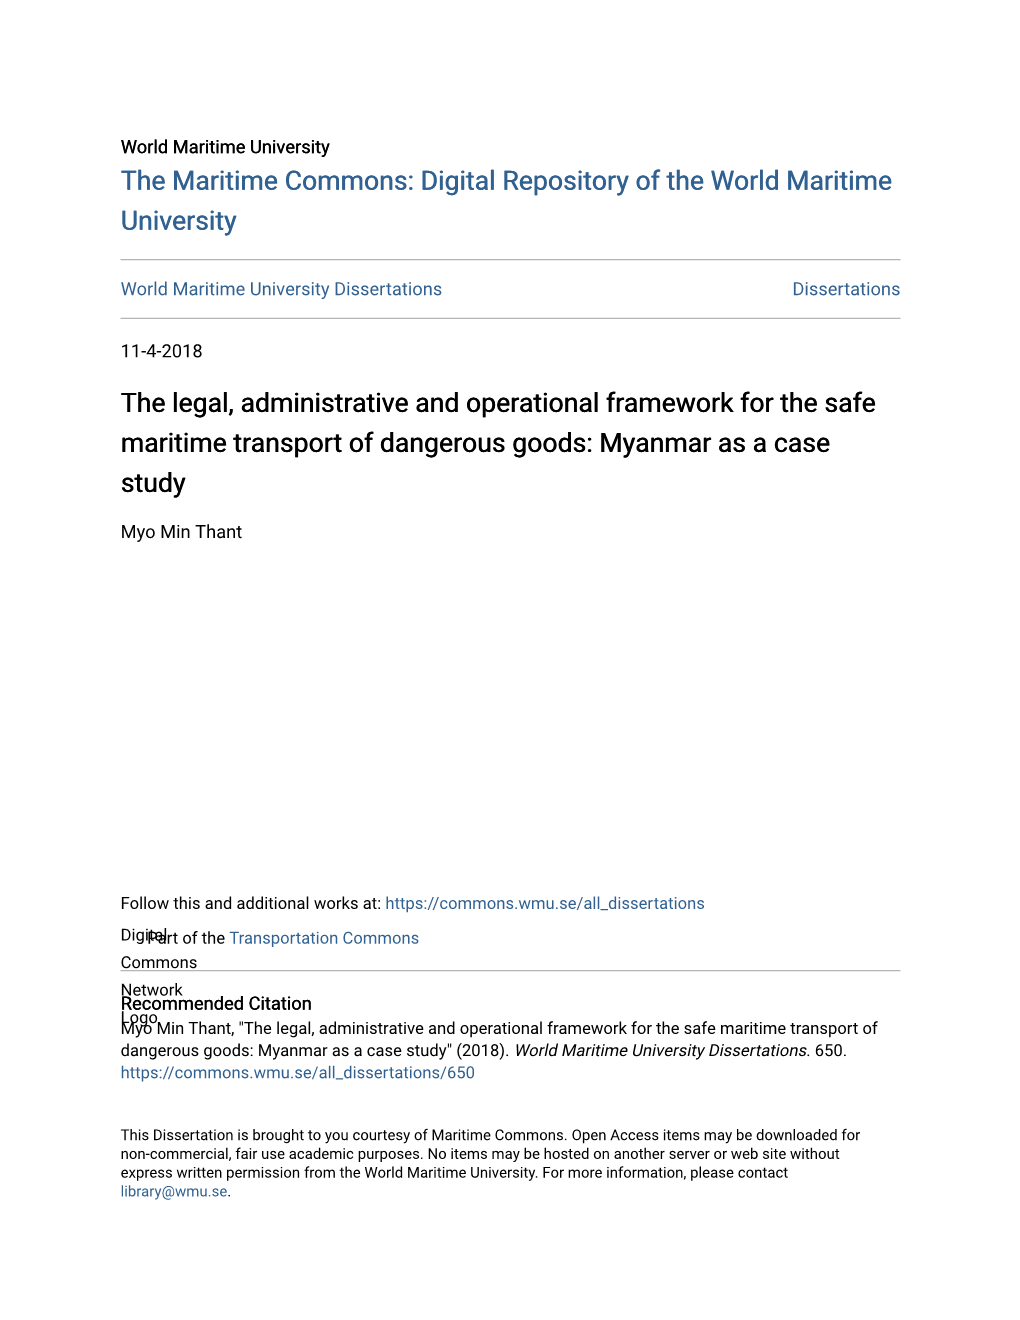 The Legal, Administrative and Operational Framework for the Safe Maritime Transport of Dangerous Goods: Myanmar As a Case Study